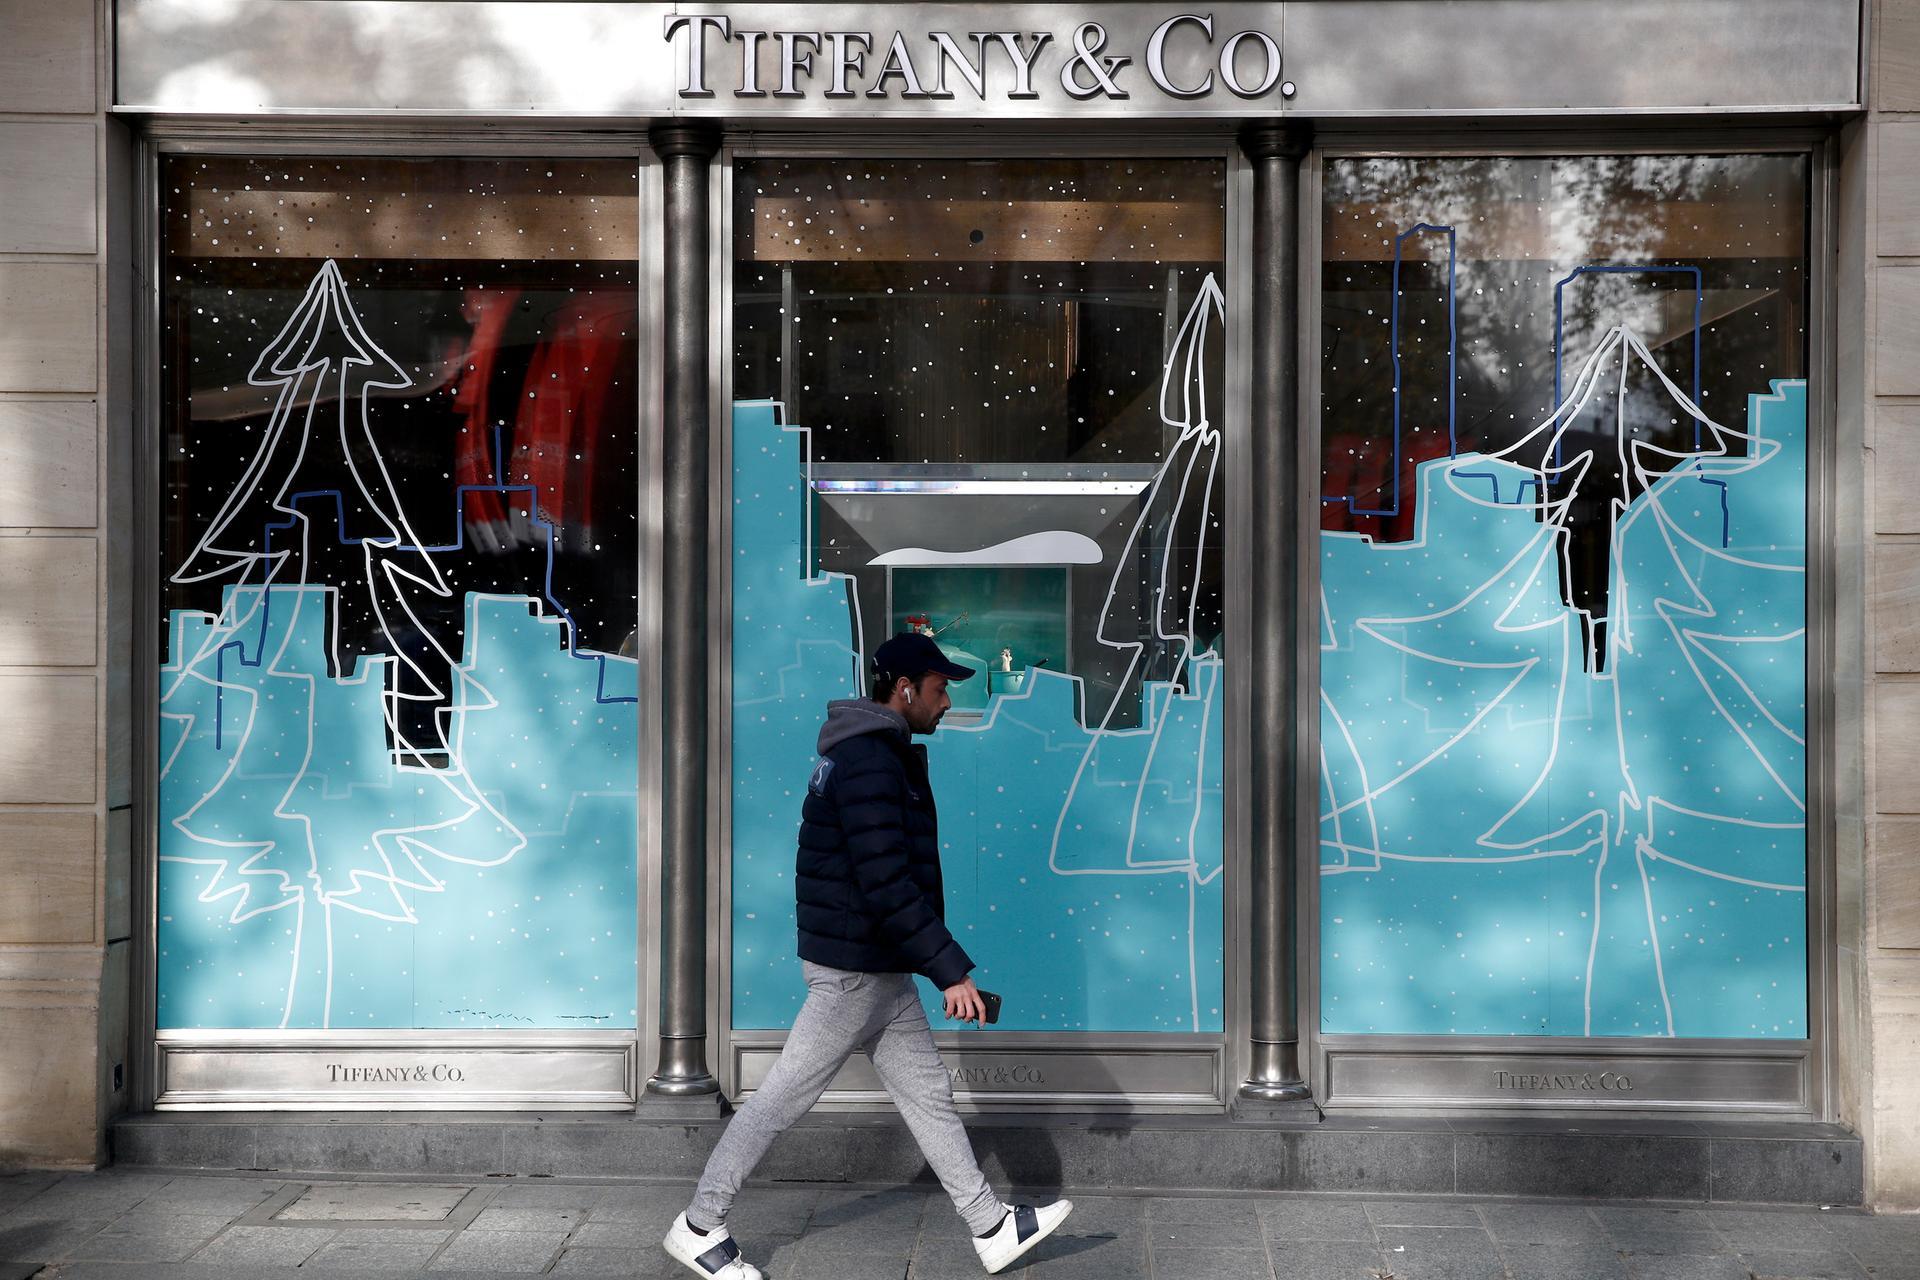 French luxury group LVMH to buy Tiffany for $16.2 billion